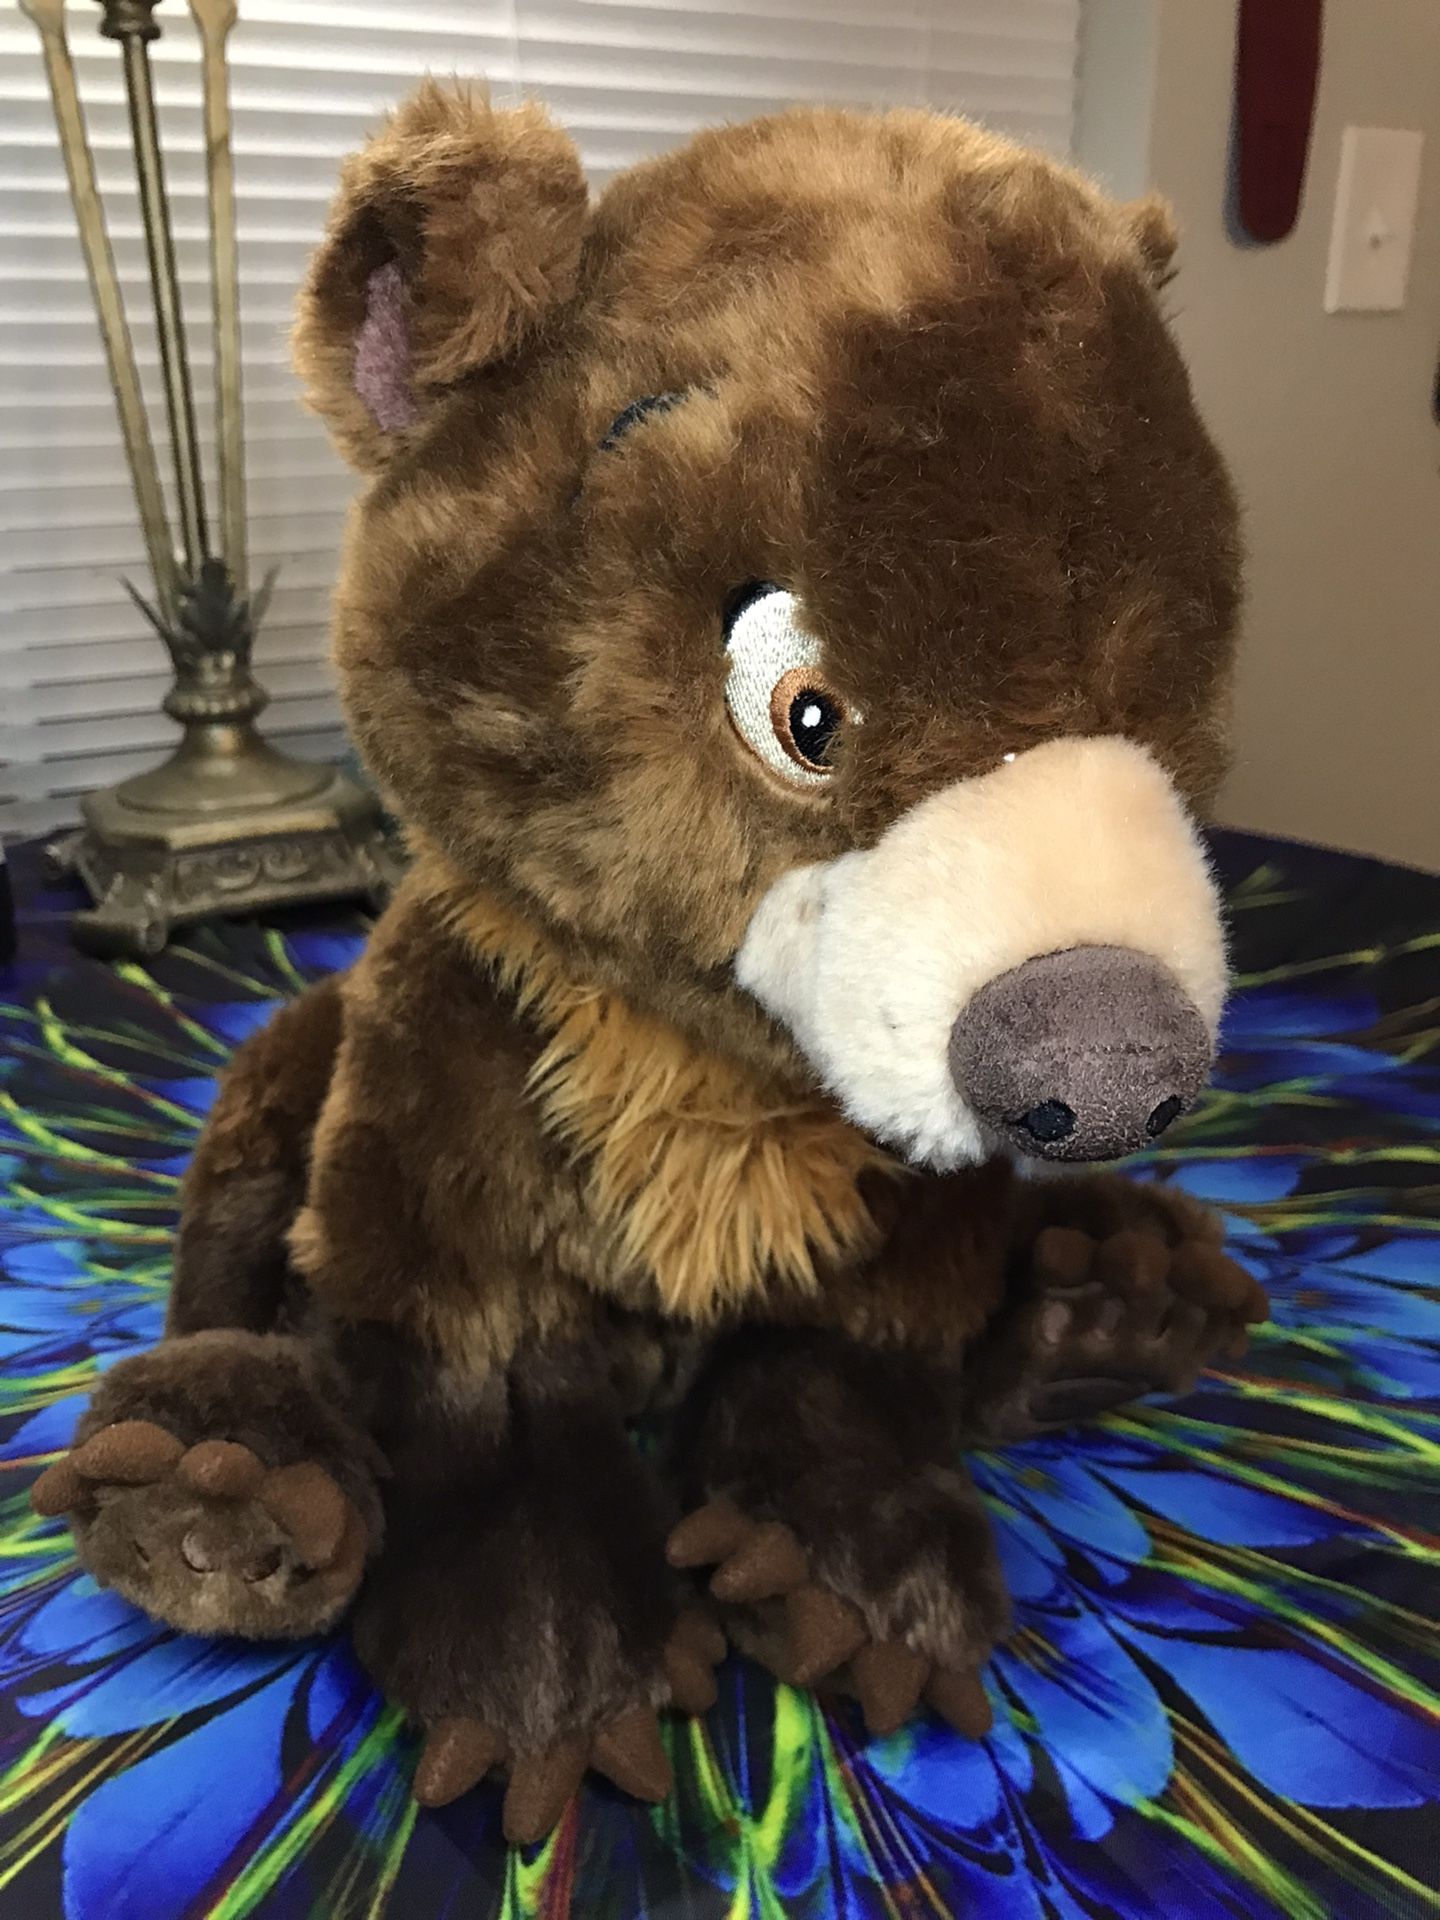 Disney Store Exclusive Brother Bear Plush